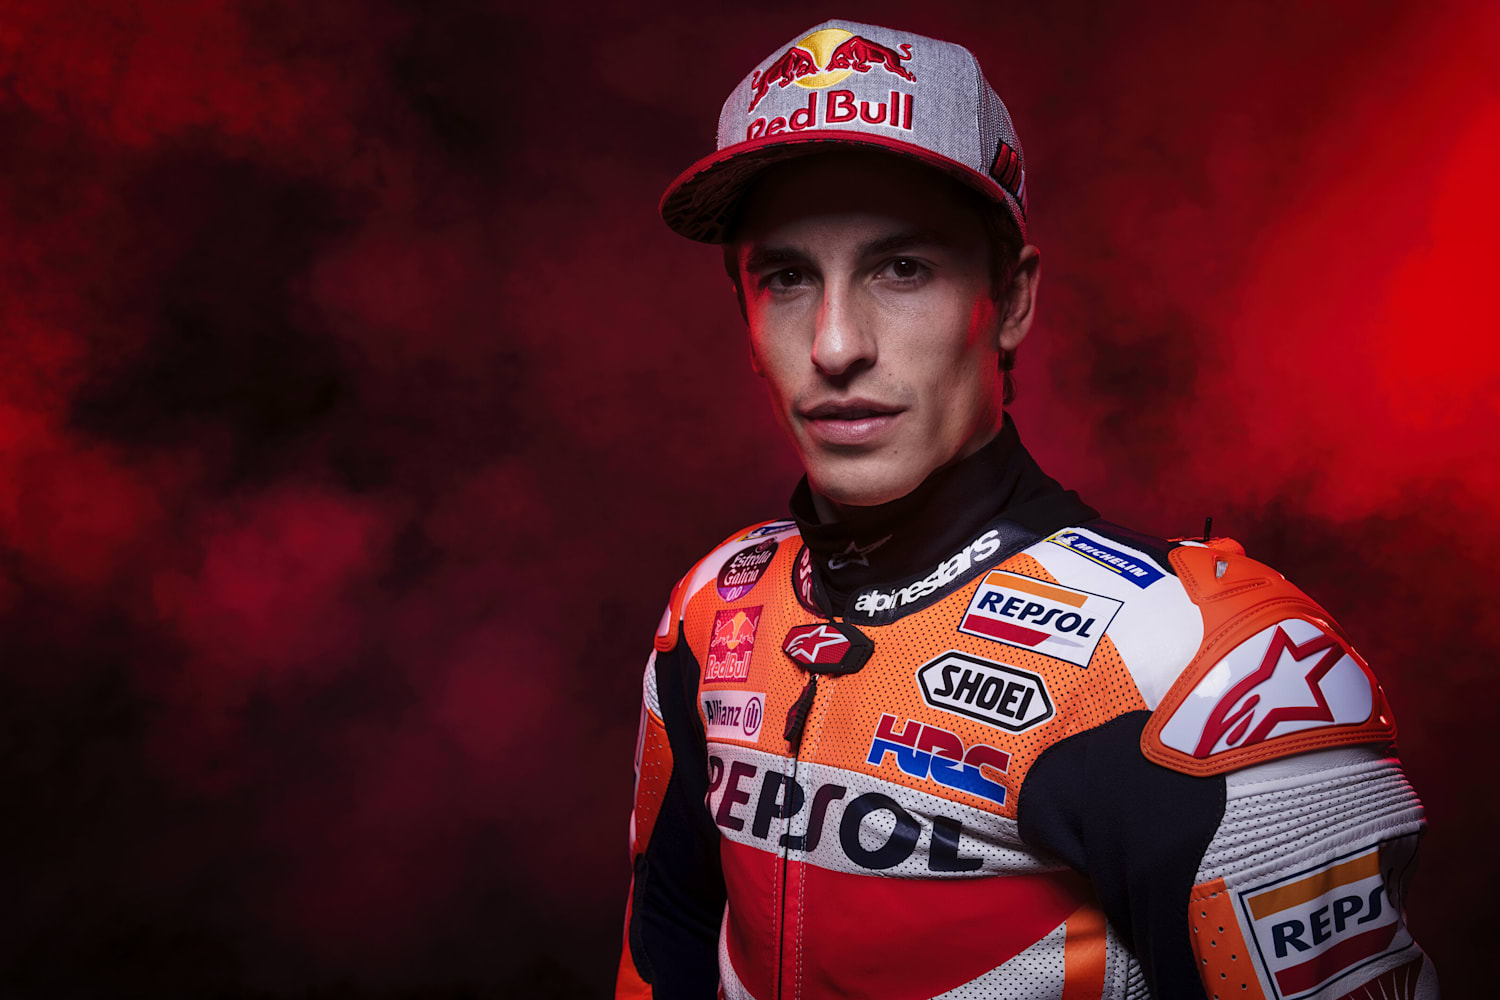 Miguel Oliveira excited about returning to the tracks 